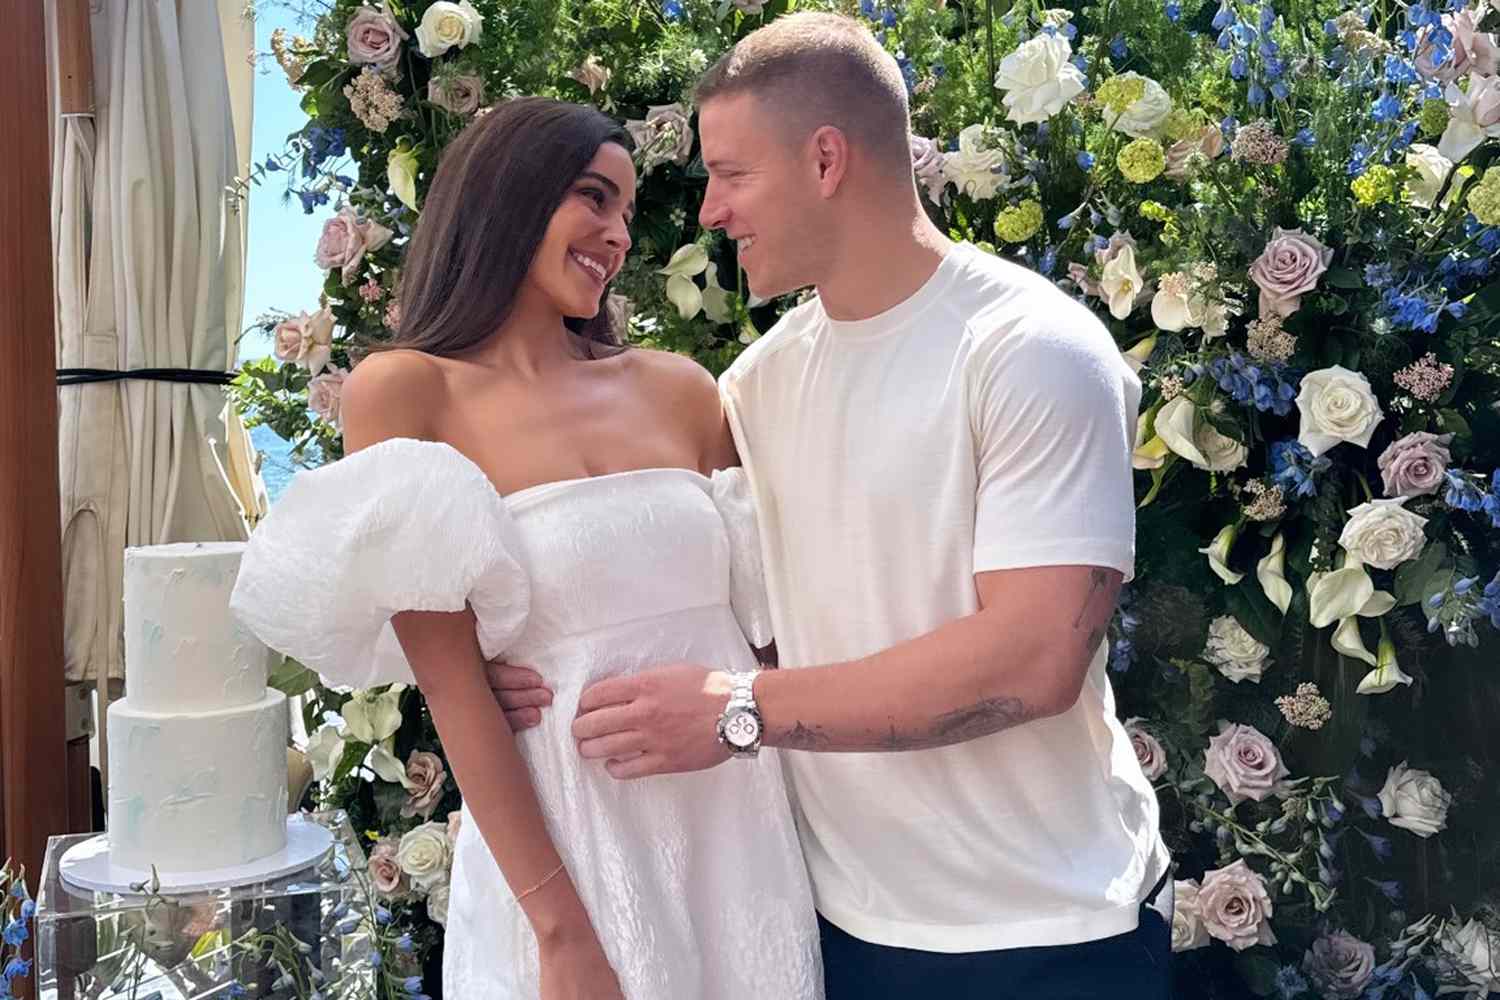 Olivia Culpo Shares Behind-the-Scenes of Her 'Dream Bridal Shower' Ahead of Wedding to Christian McCaffrey